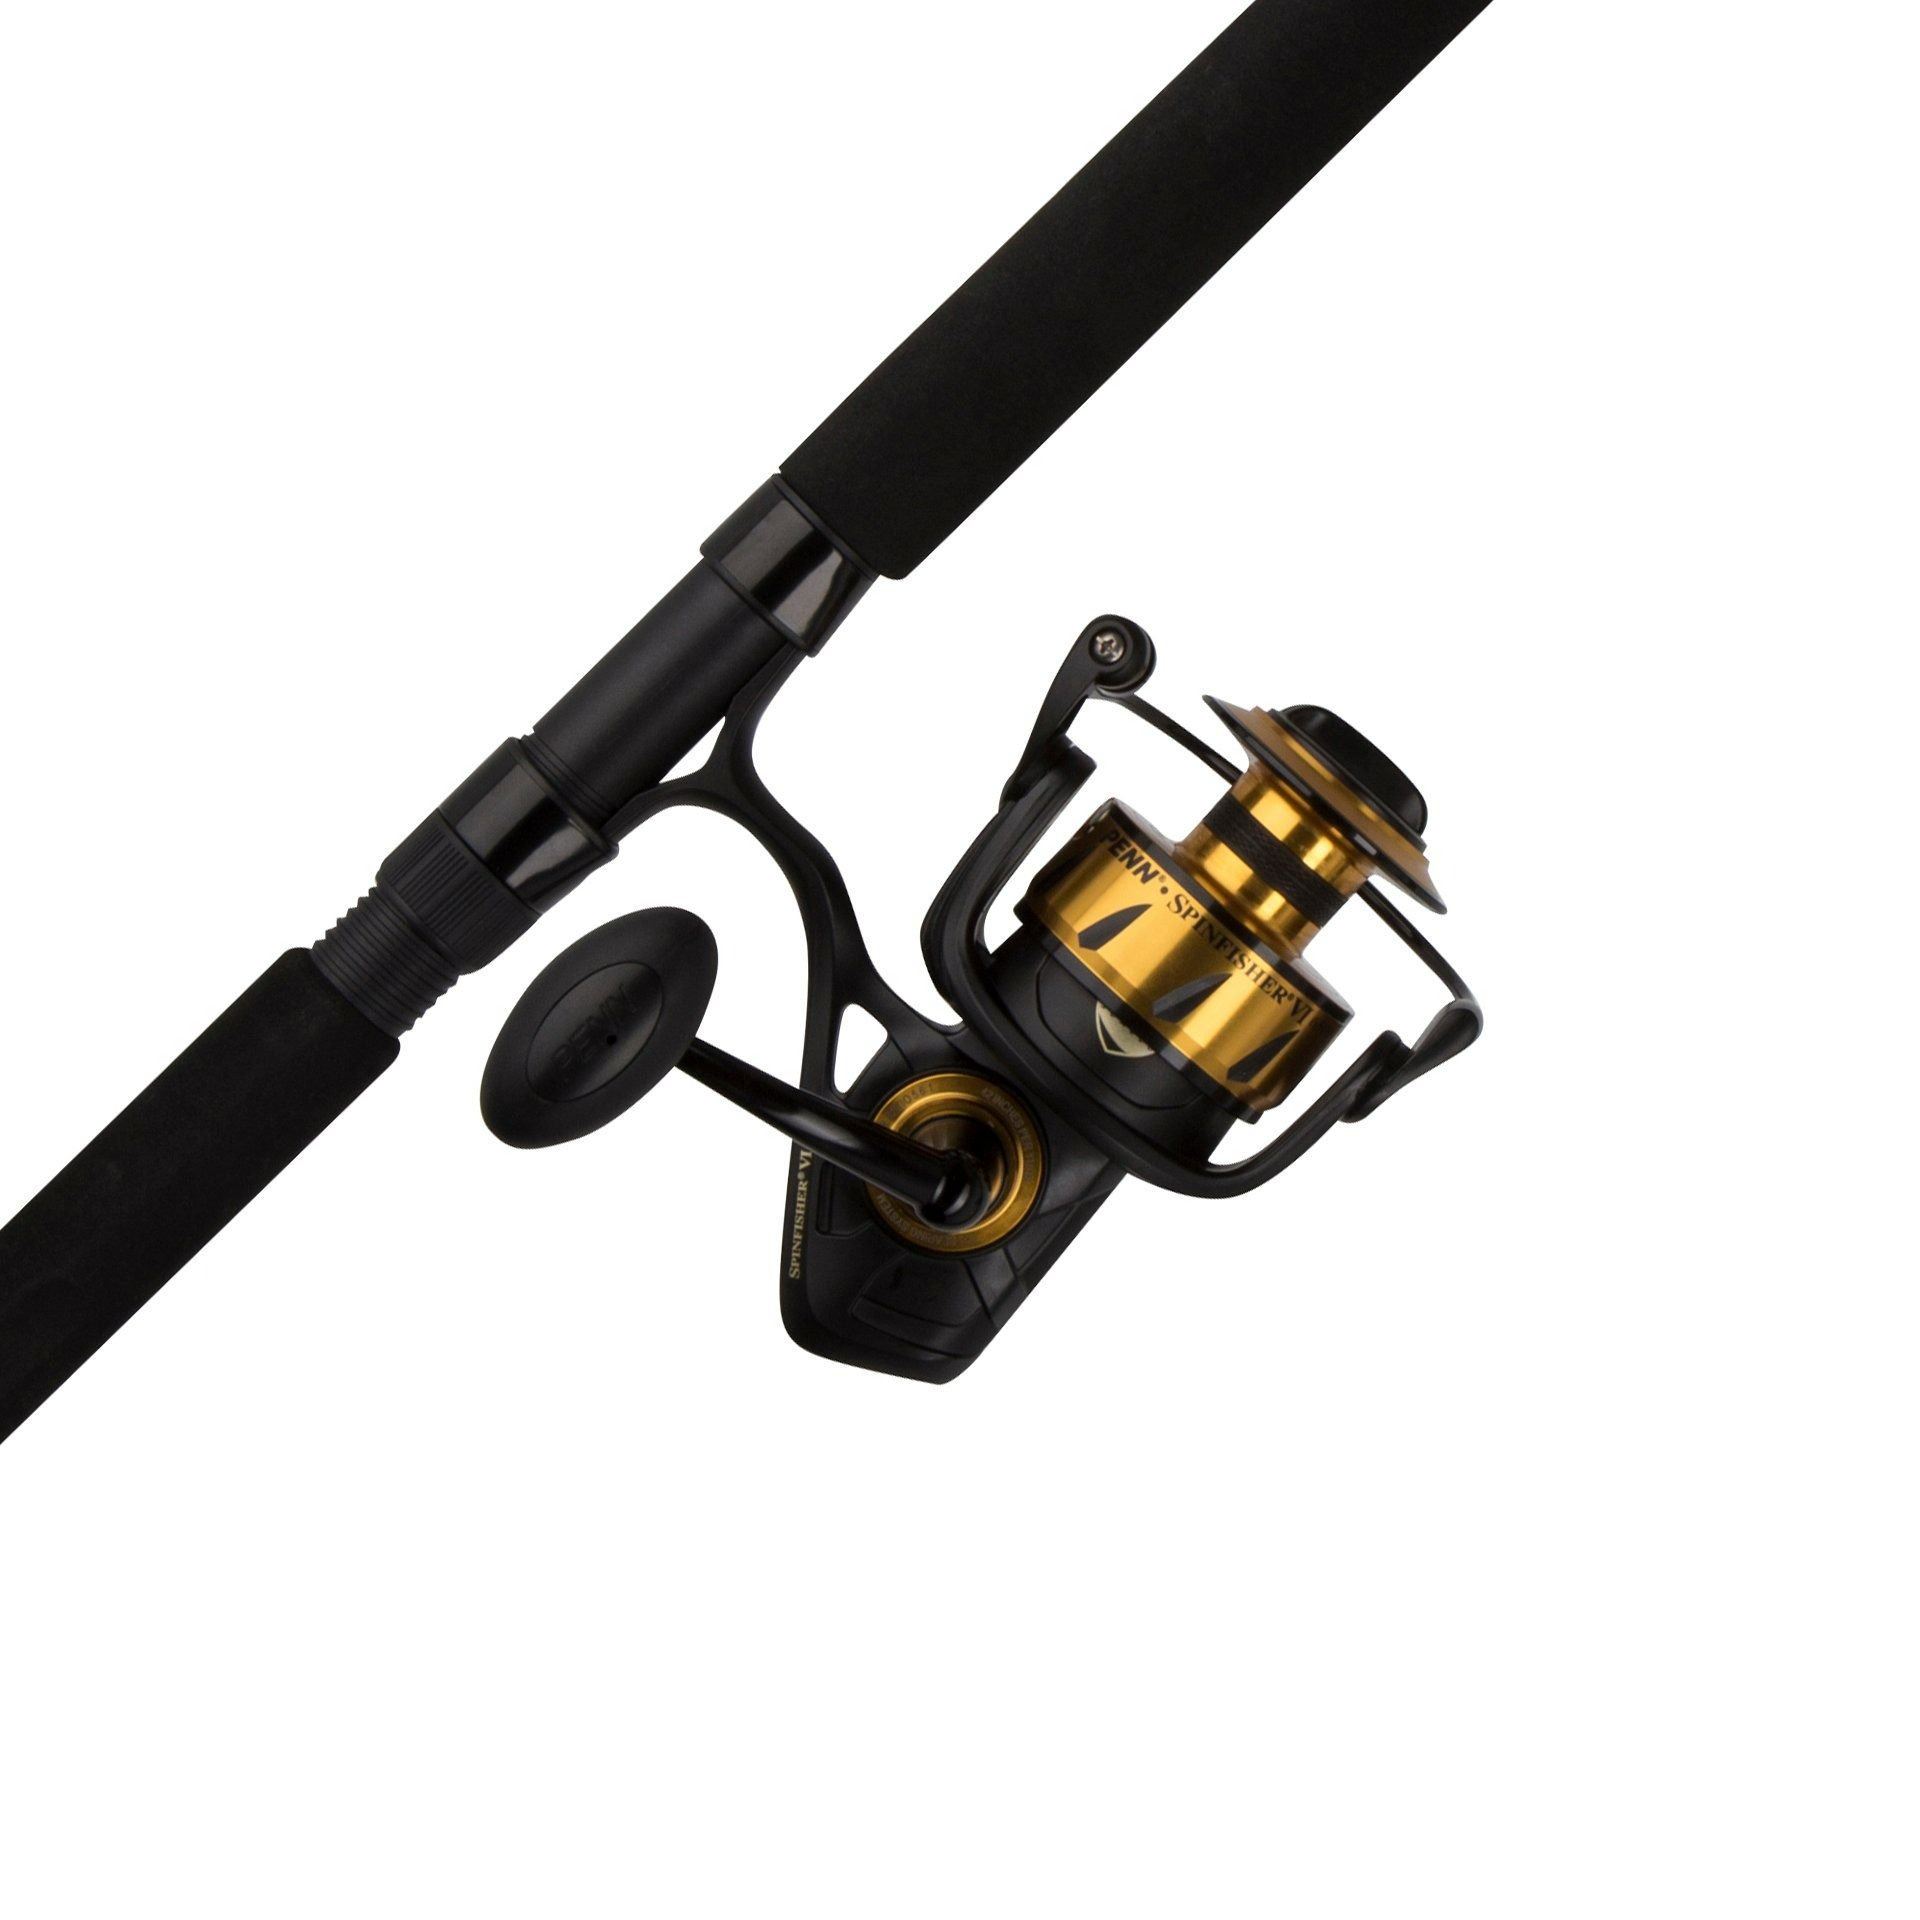 PENN 6’6” Spinfisher VI Fishing Rod and Reel Spinning Combo $156.48